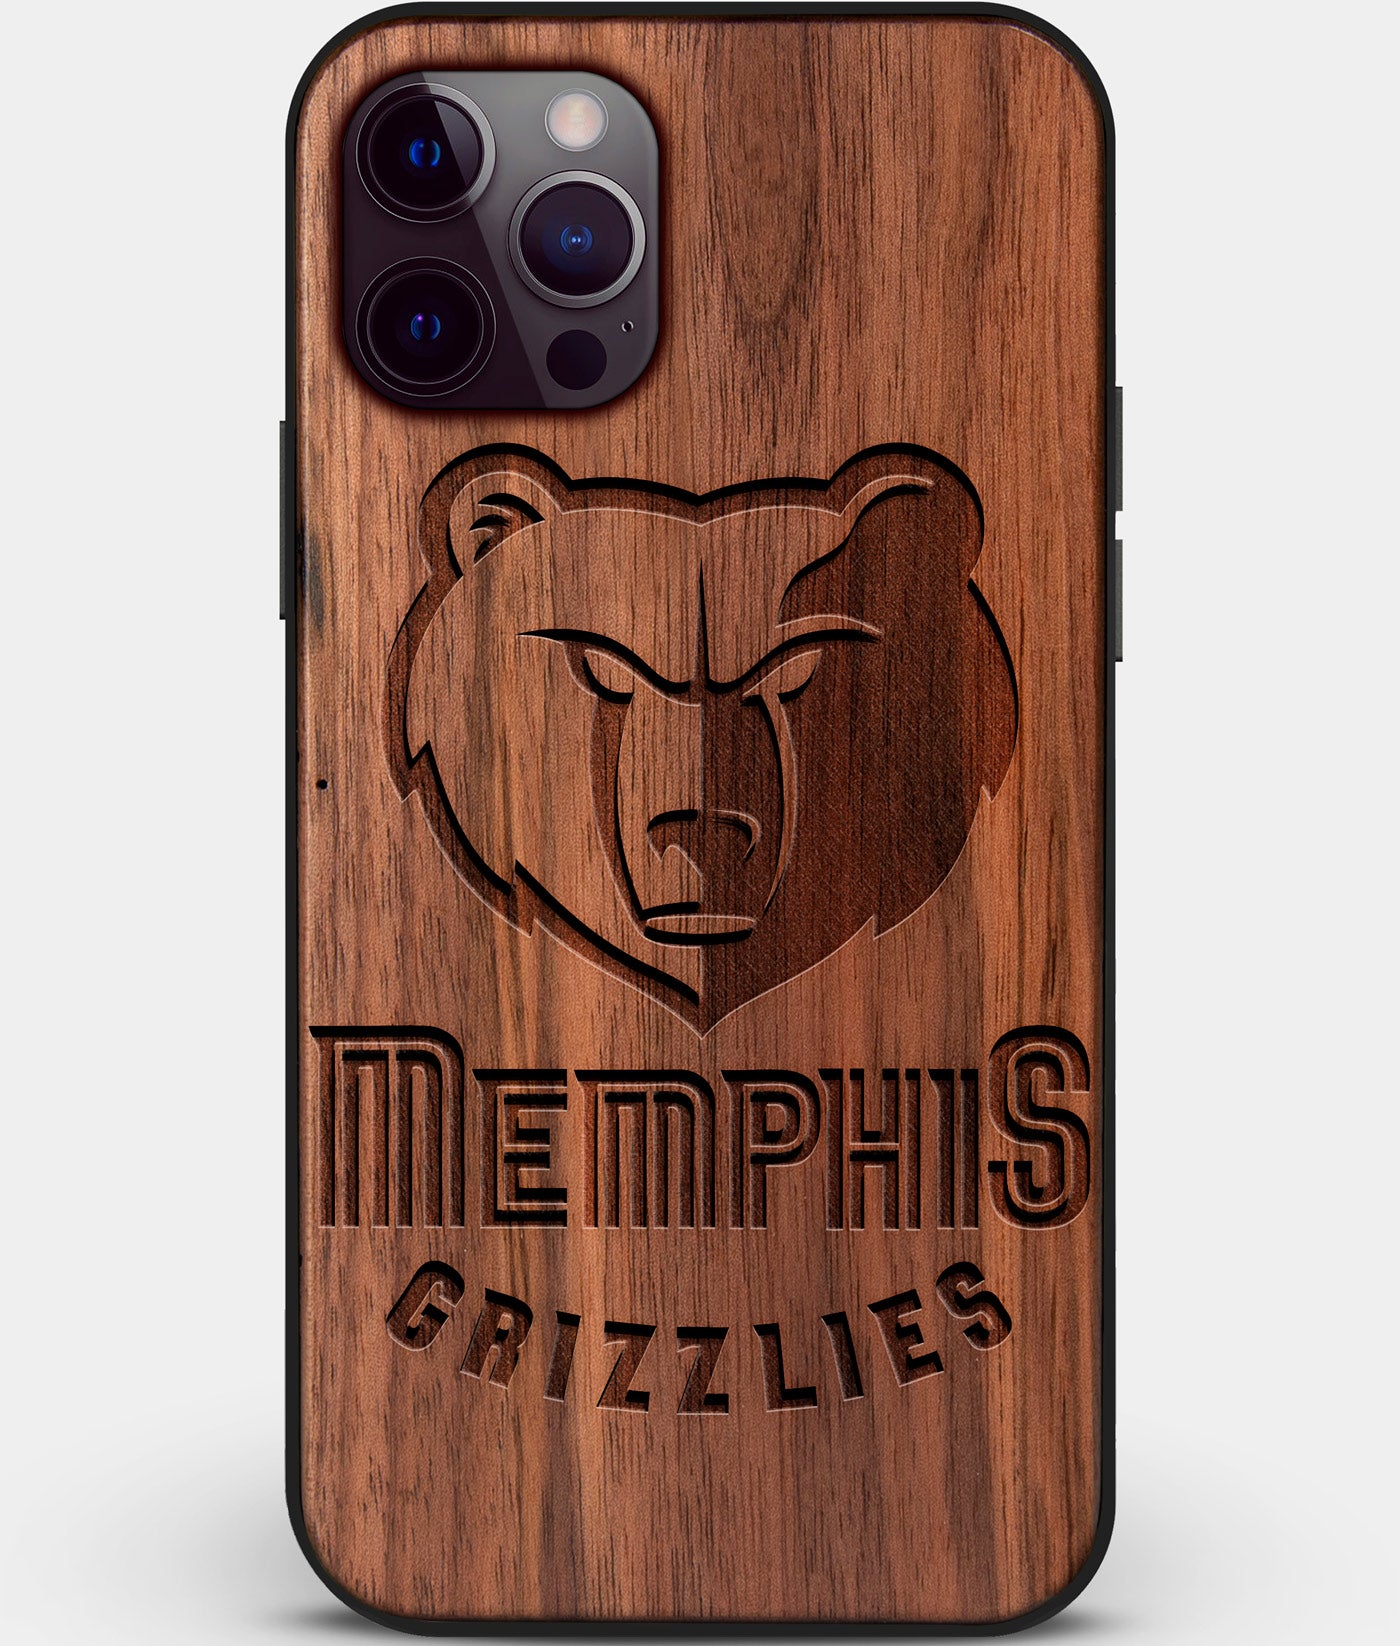 Custom Carved Wood Memphis Grizzlies iPhone 12 Pro Case | Personalized Walnut Wood Memphis Grizzlies Cover, Birthday Gift, Gifts For Him, Monogrammed Gift For Fan | by Engraved In Nature